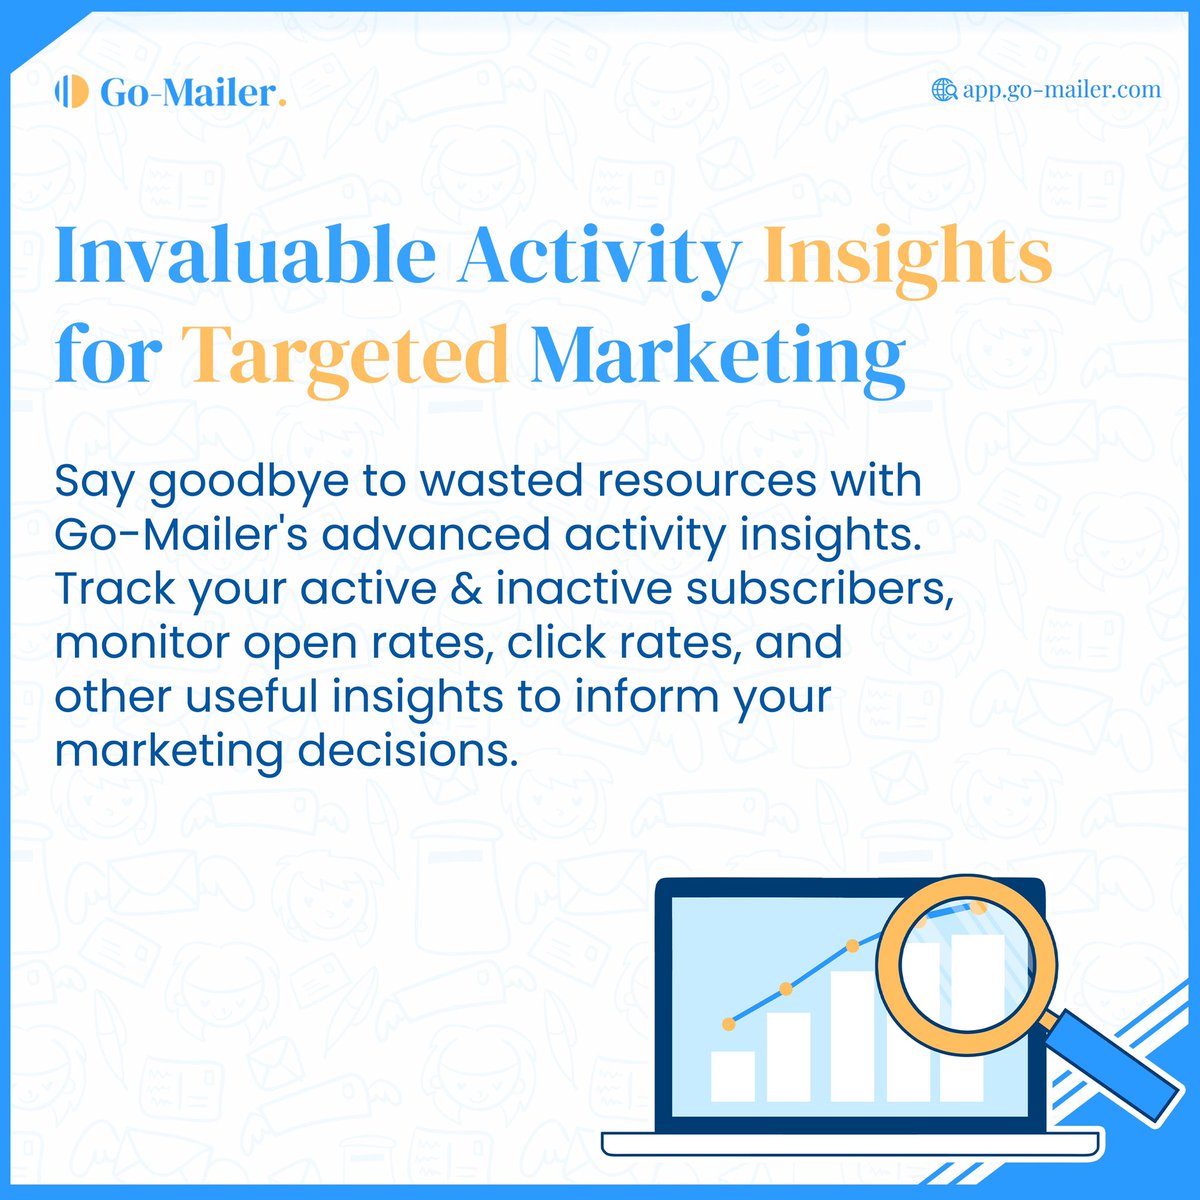 Increase your conversions with our advanced email activity insights. Create targeted strategies for a more effective marketing.

Want to learn more? Send a dm today.
.
.
#gomailer #emailinsights #emailmarketing #emailmanagement #digitalmarketing